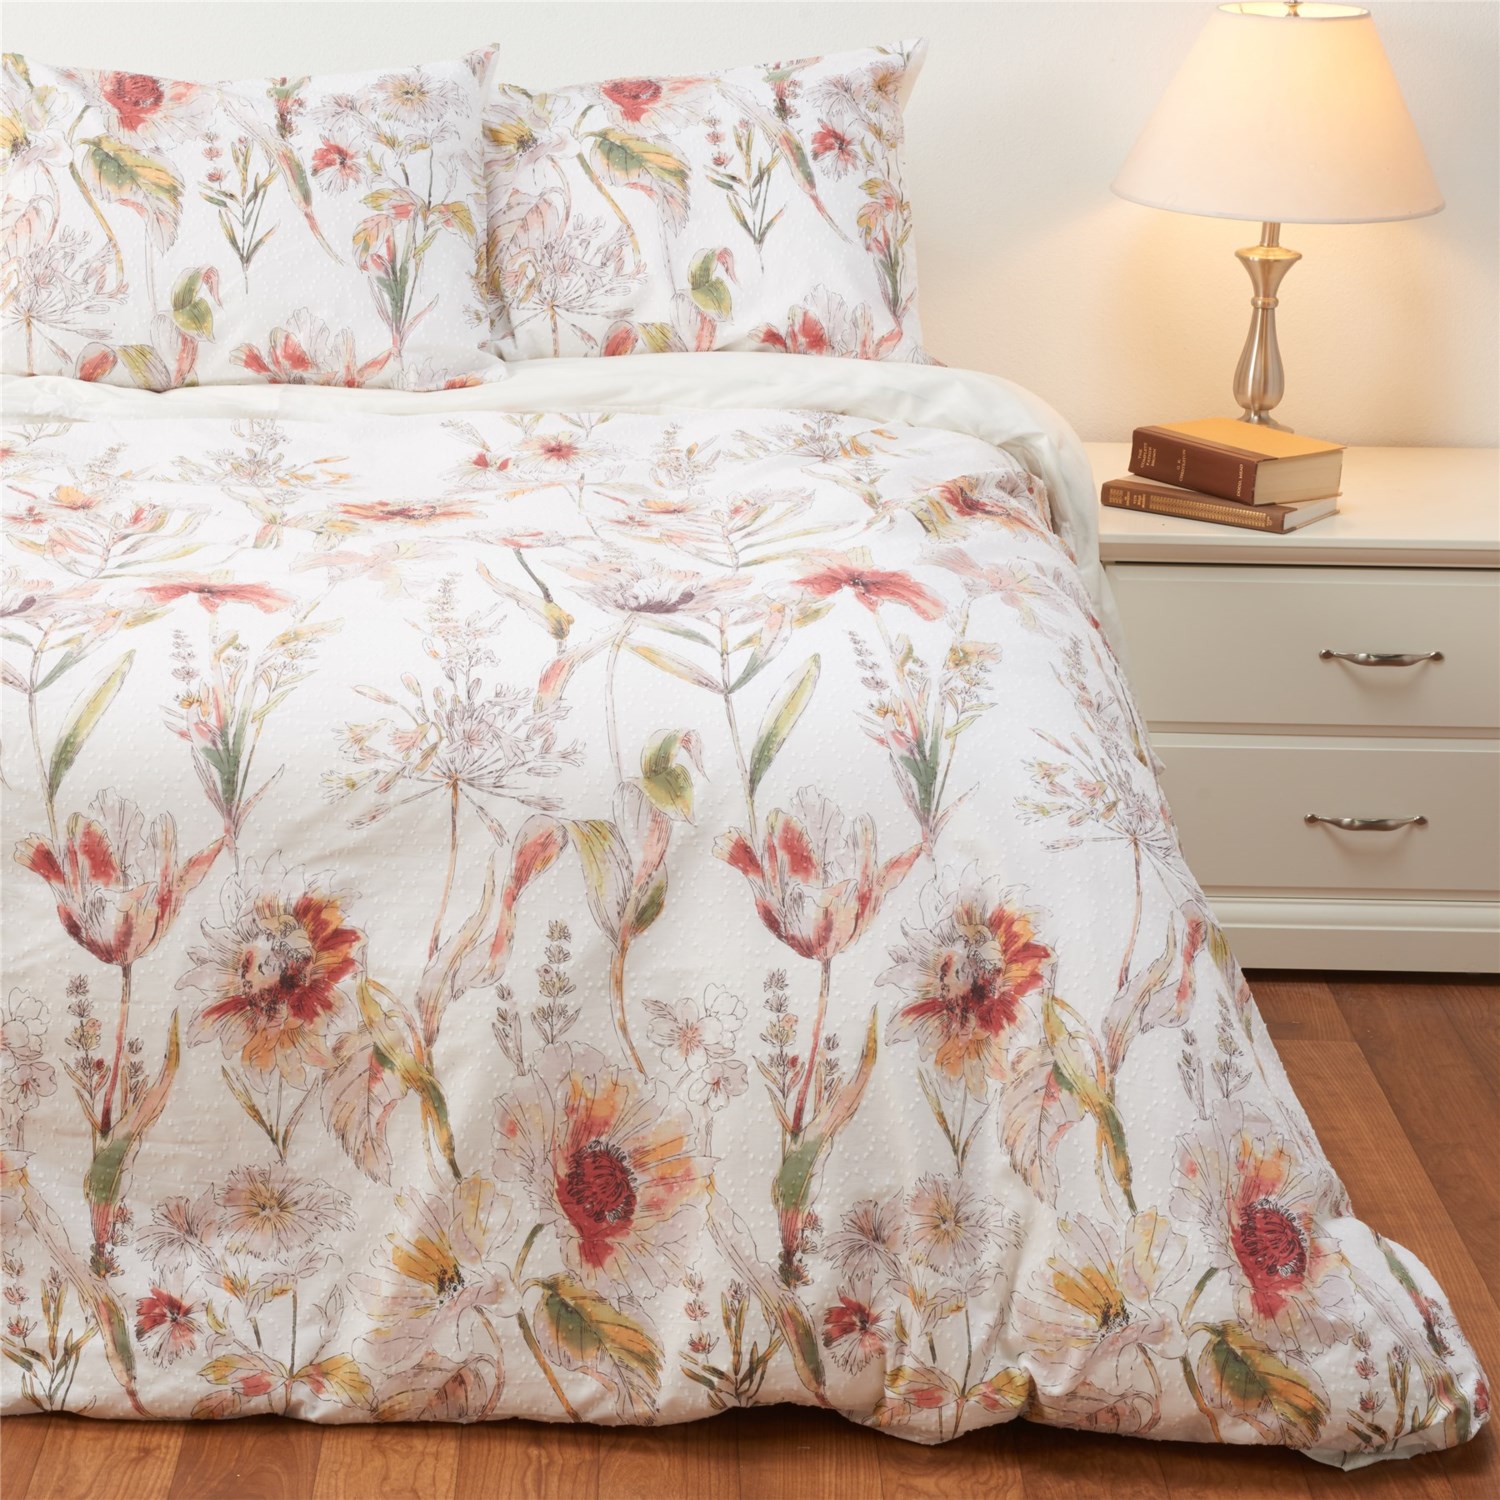 Cynthia Rowley Bedding, Cynthia Rowley Bedding King Size